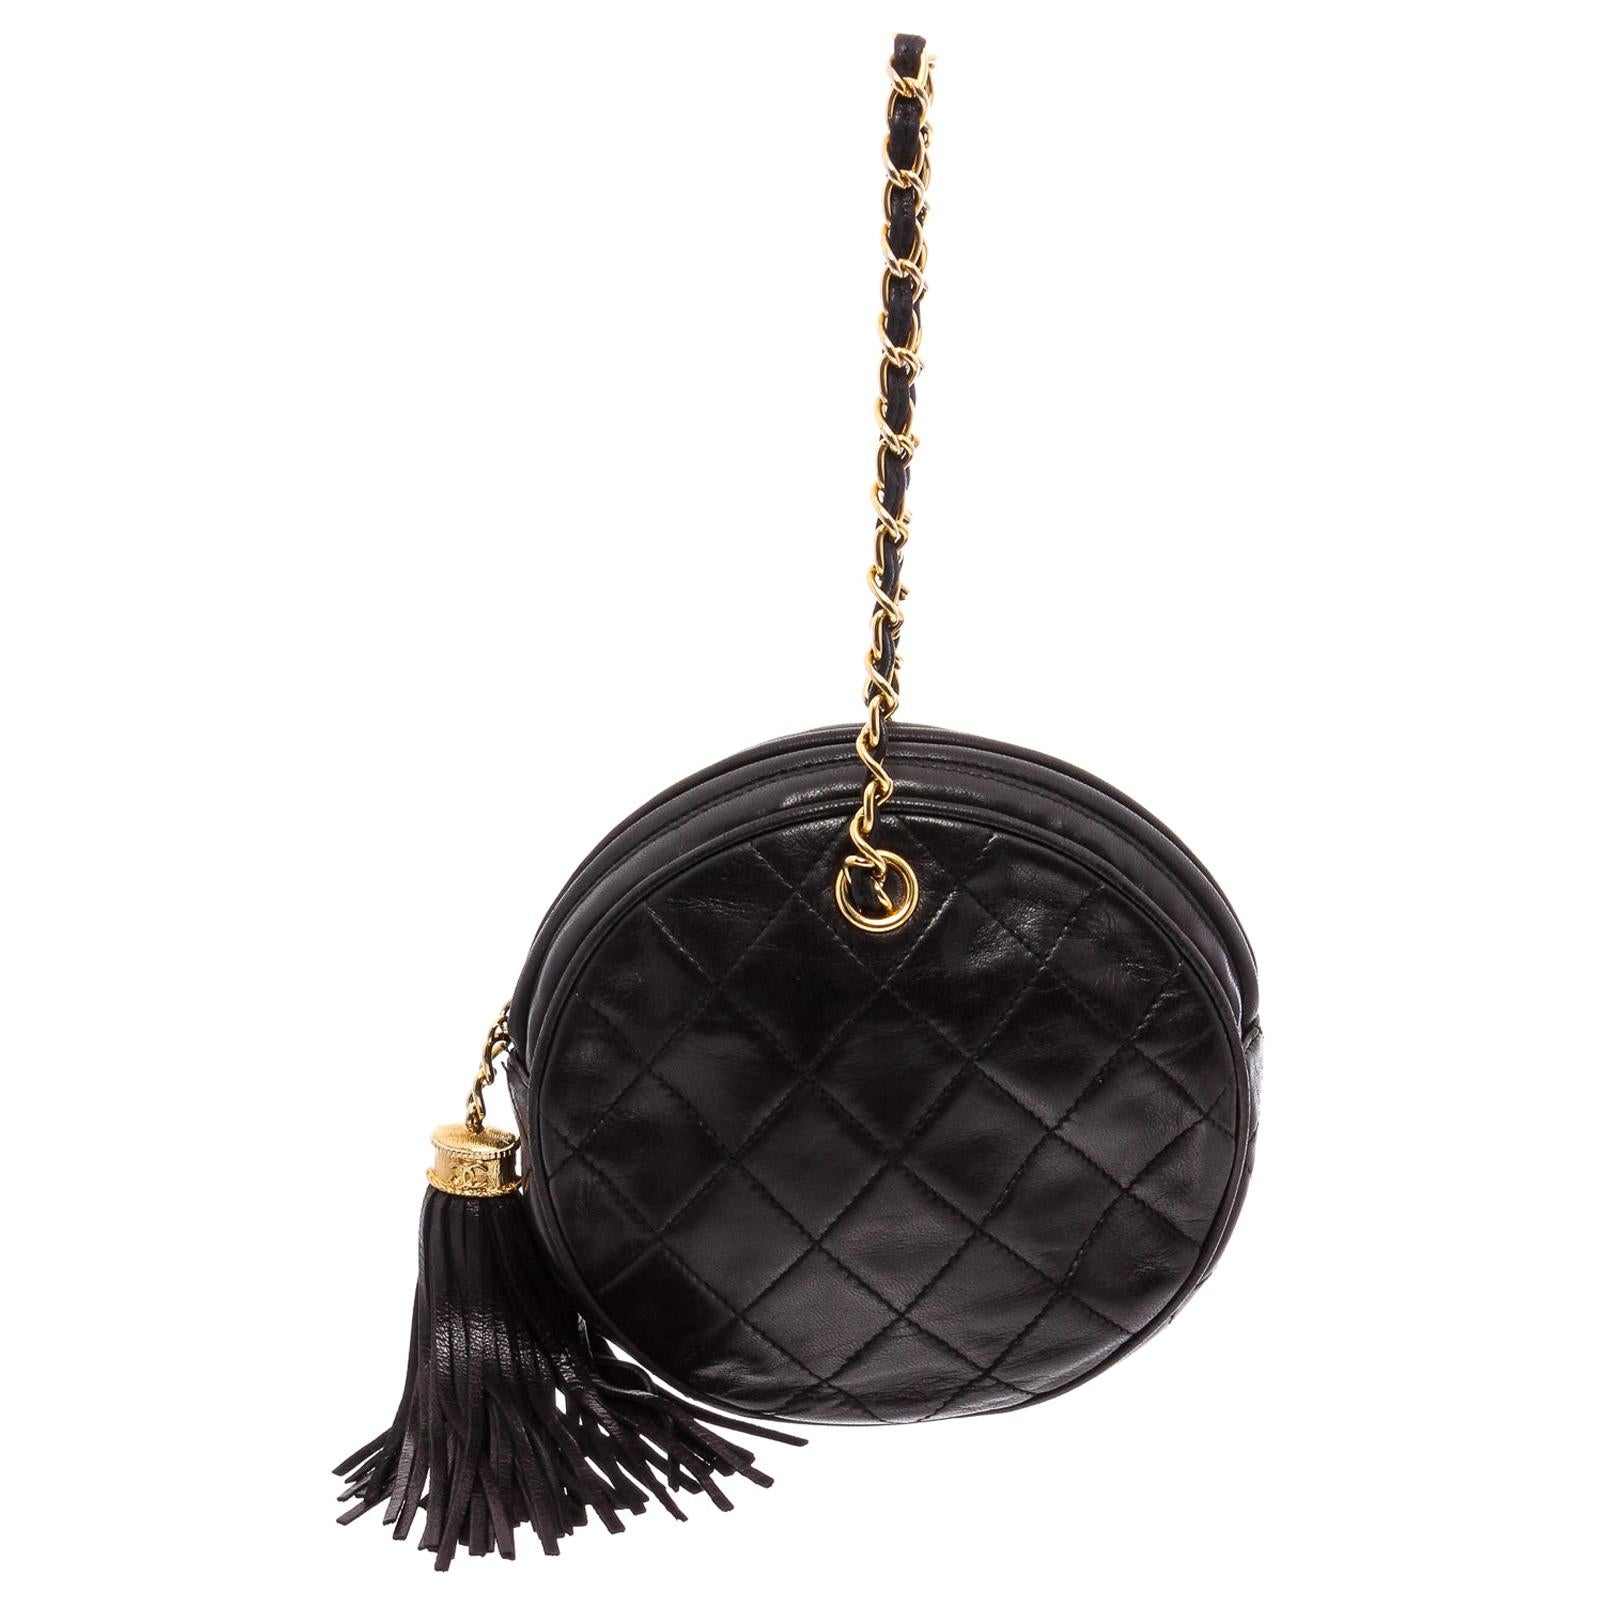 Chanel Black Quilted Lambskin Leather Round Tassel Wristlet Clutch Bag